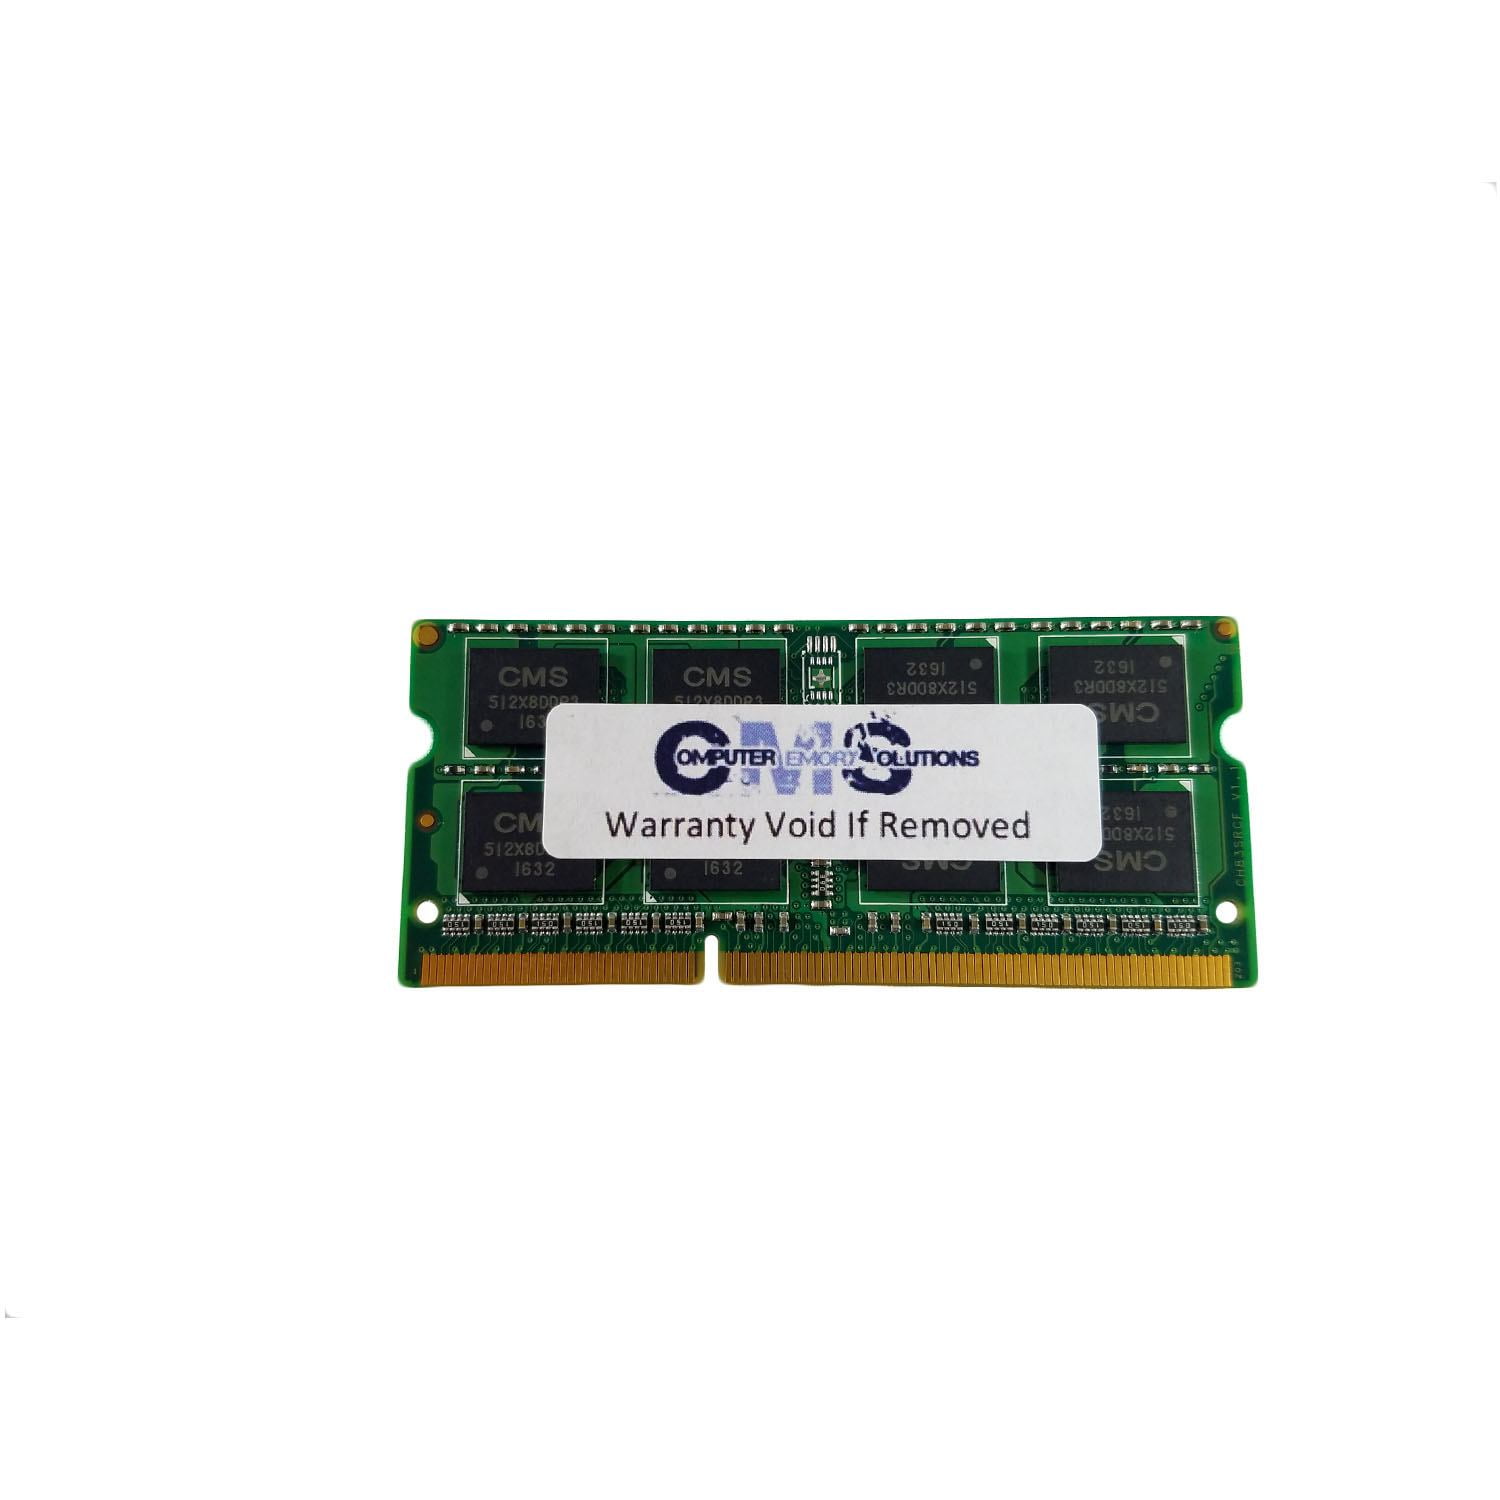 parts-quick 8GB DDR3 Memory for Toshiba Satellite P850-030 PC3-12800S 204 pin 1600MHz Laptop SODIMM Compatible RAM